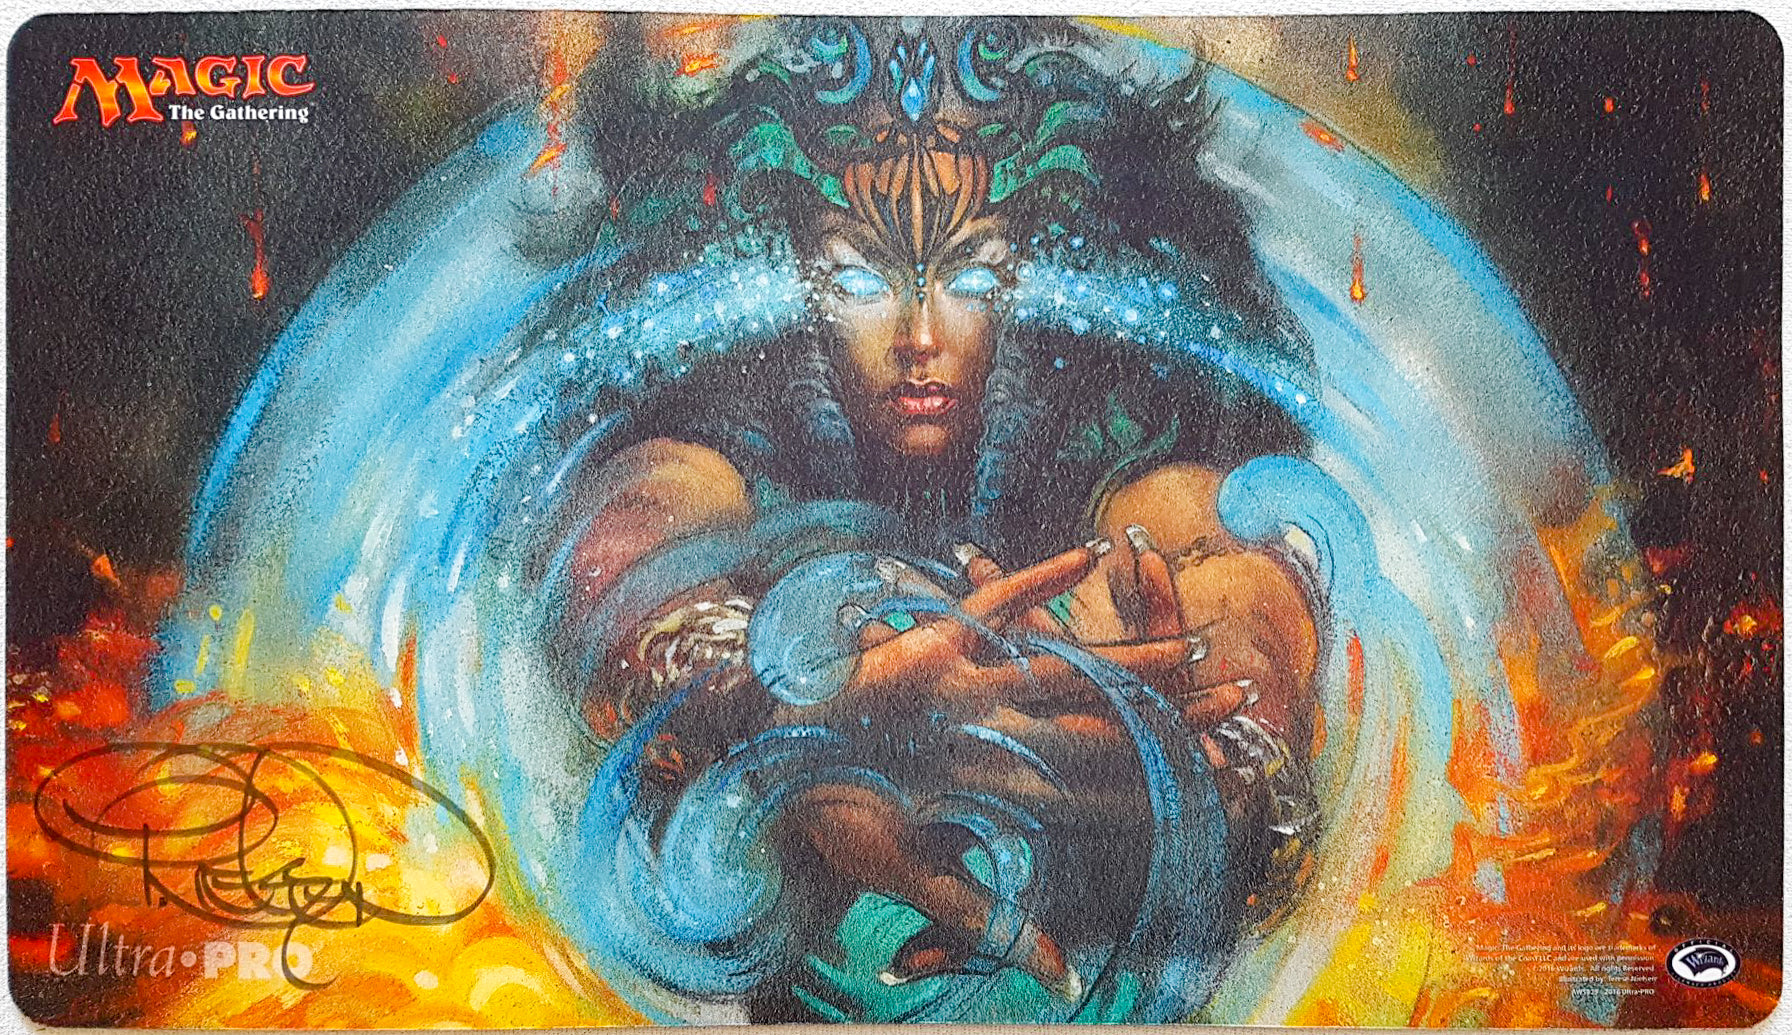 Force of Will - Terese Nielsen - Signed by the Artist - MTG Playmat